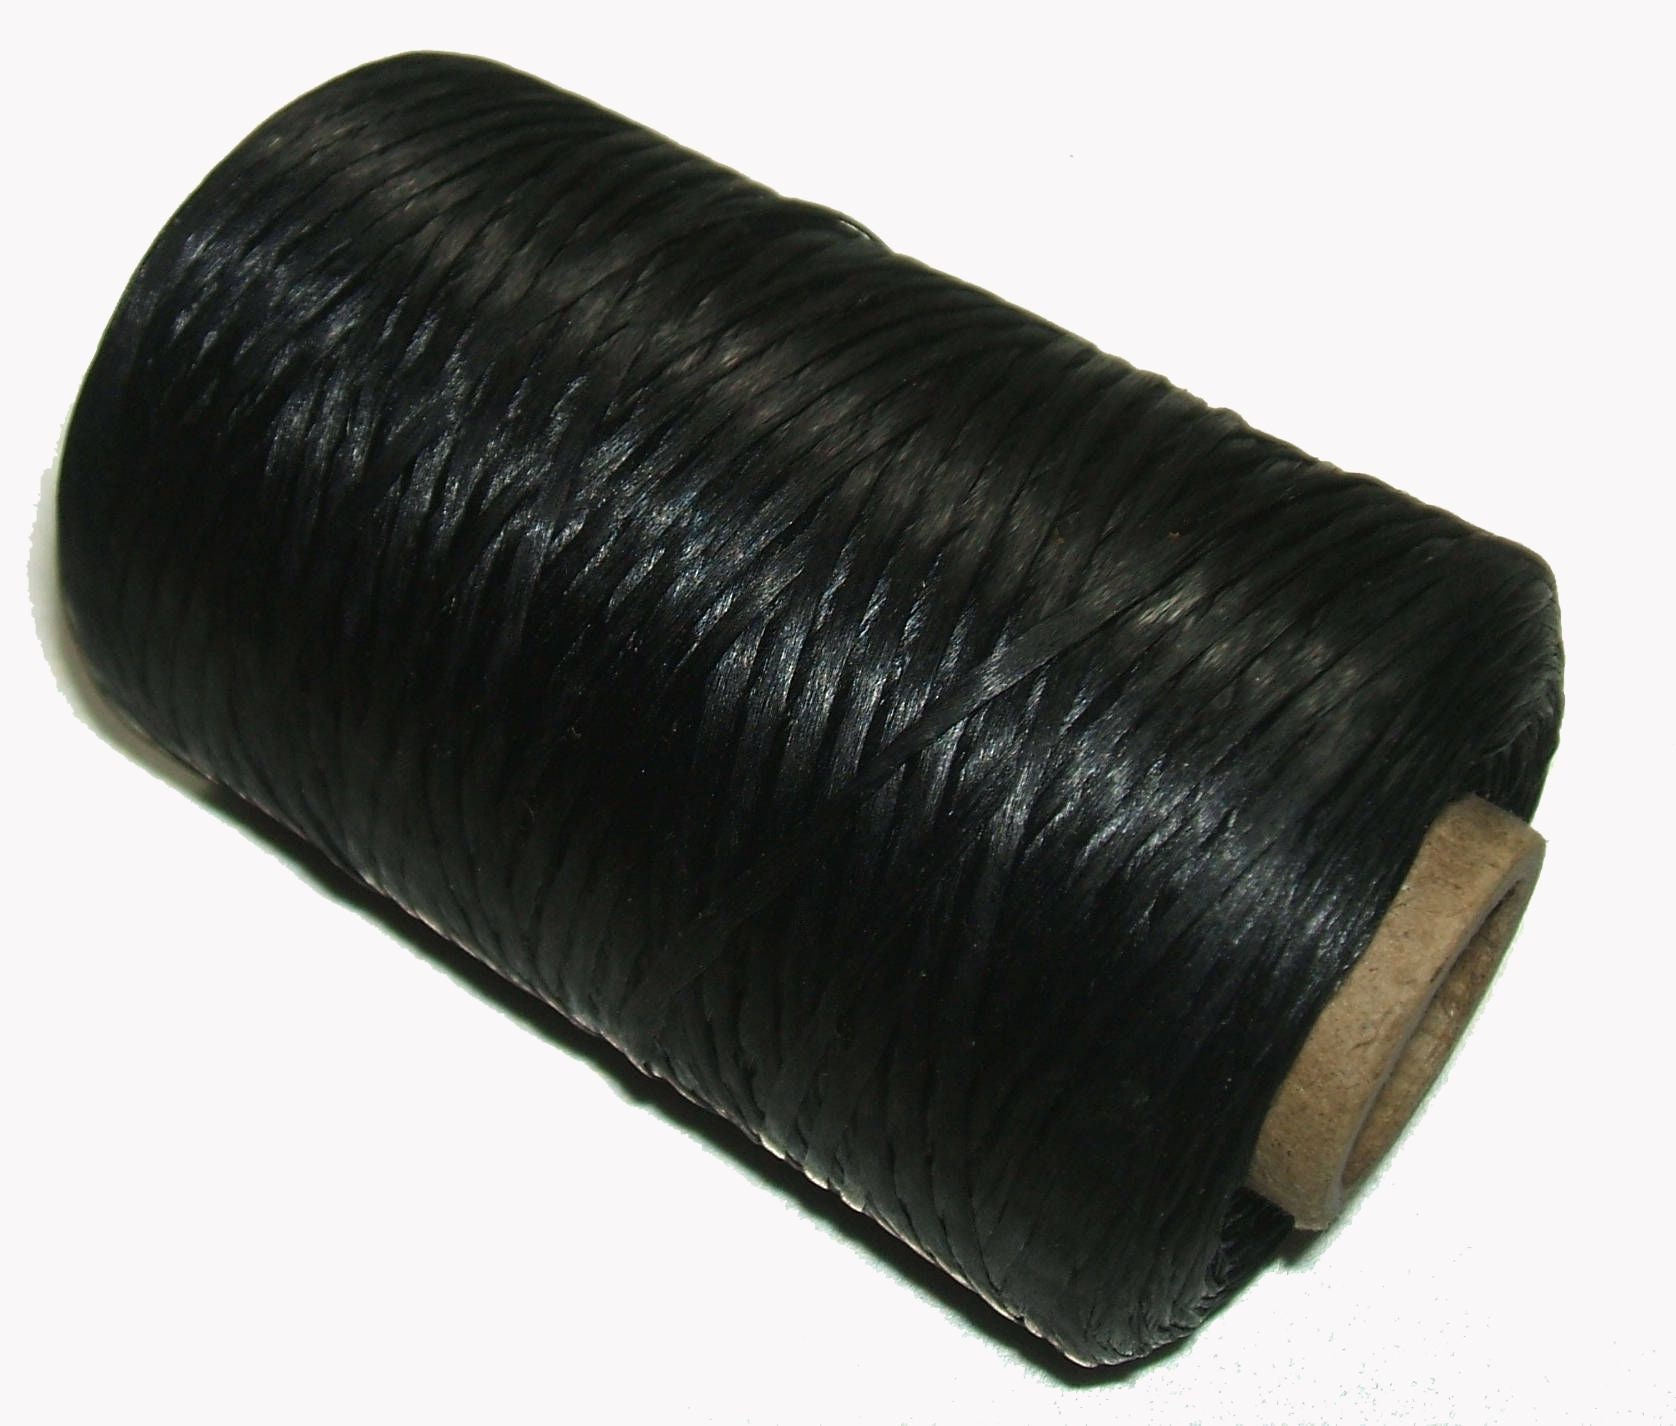 Artificial Sinew (5-Ply, 70 lb. Test, 300 Yards)